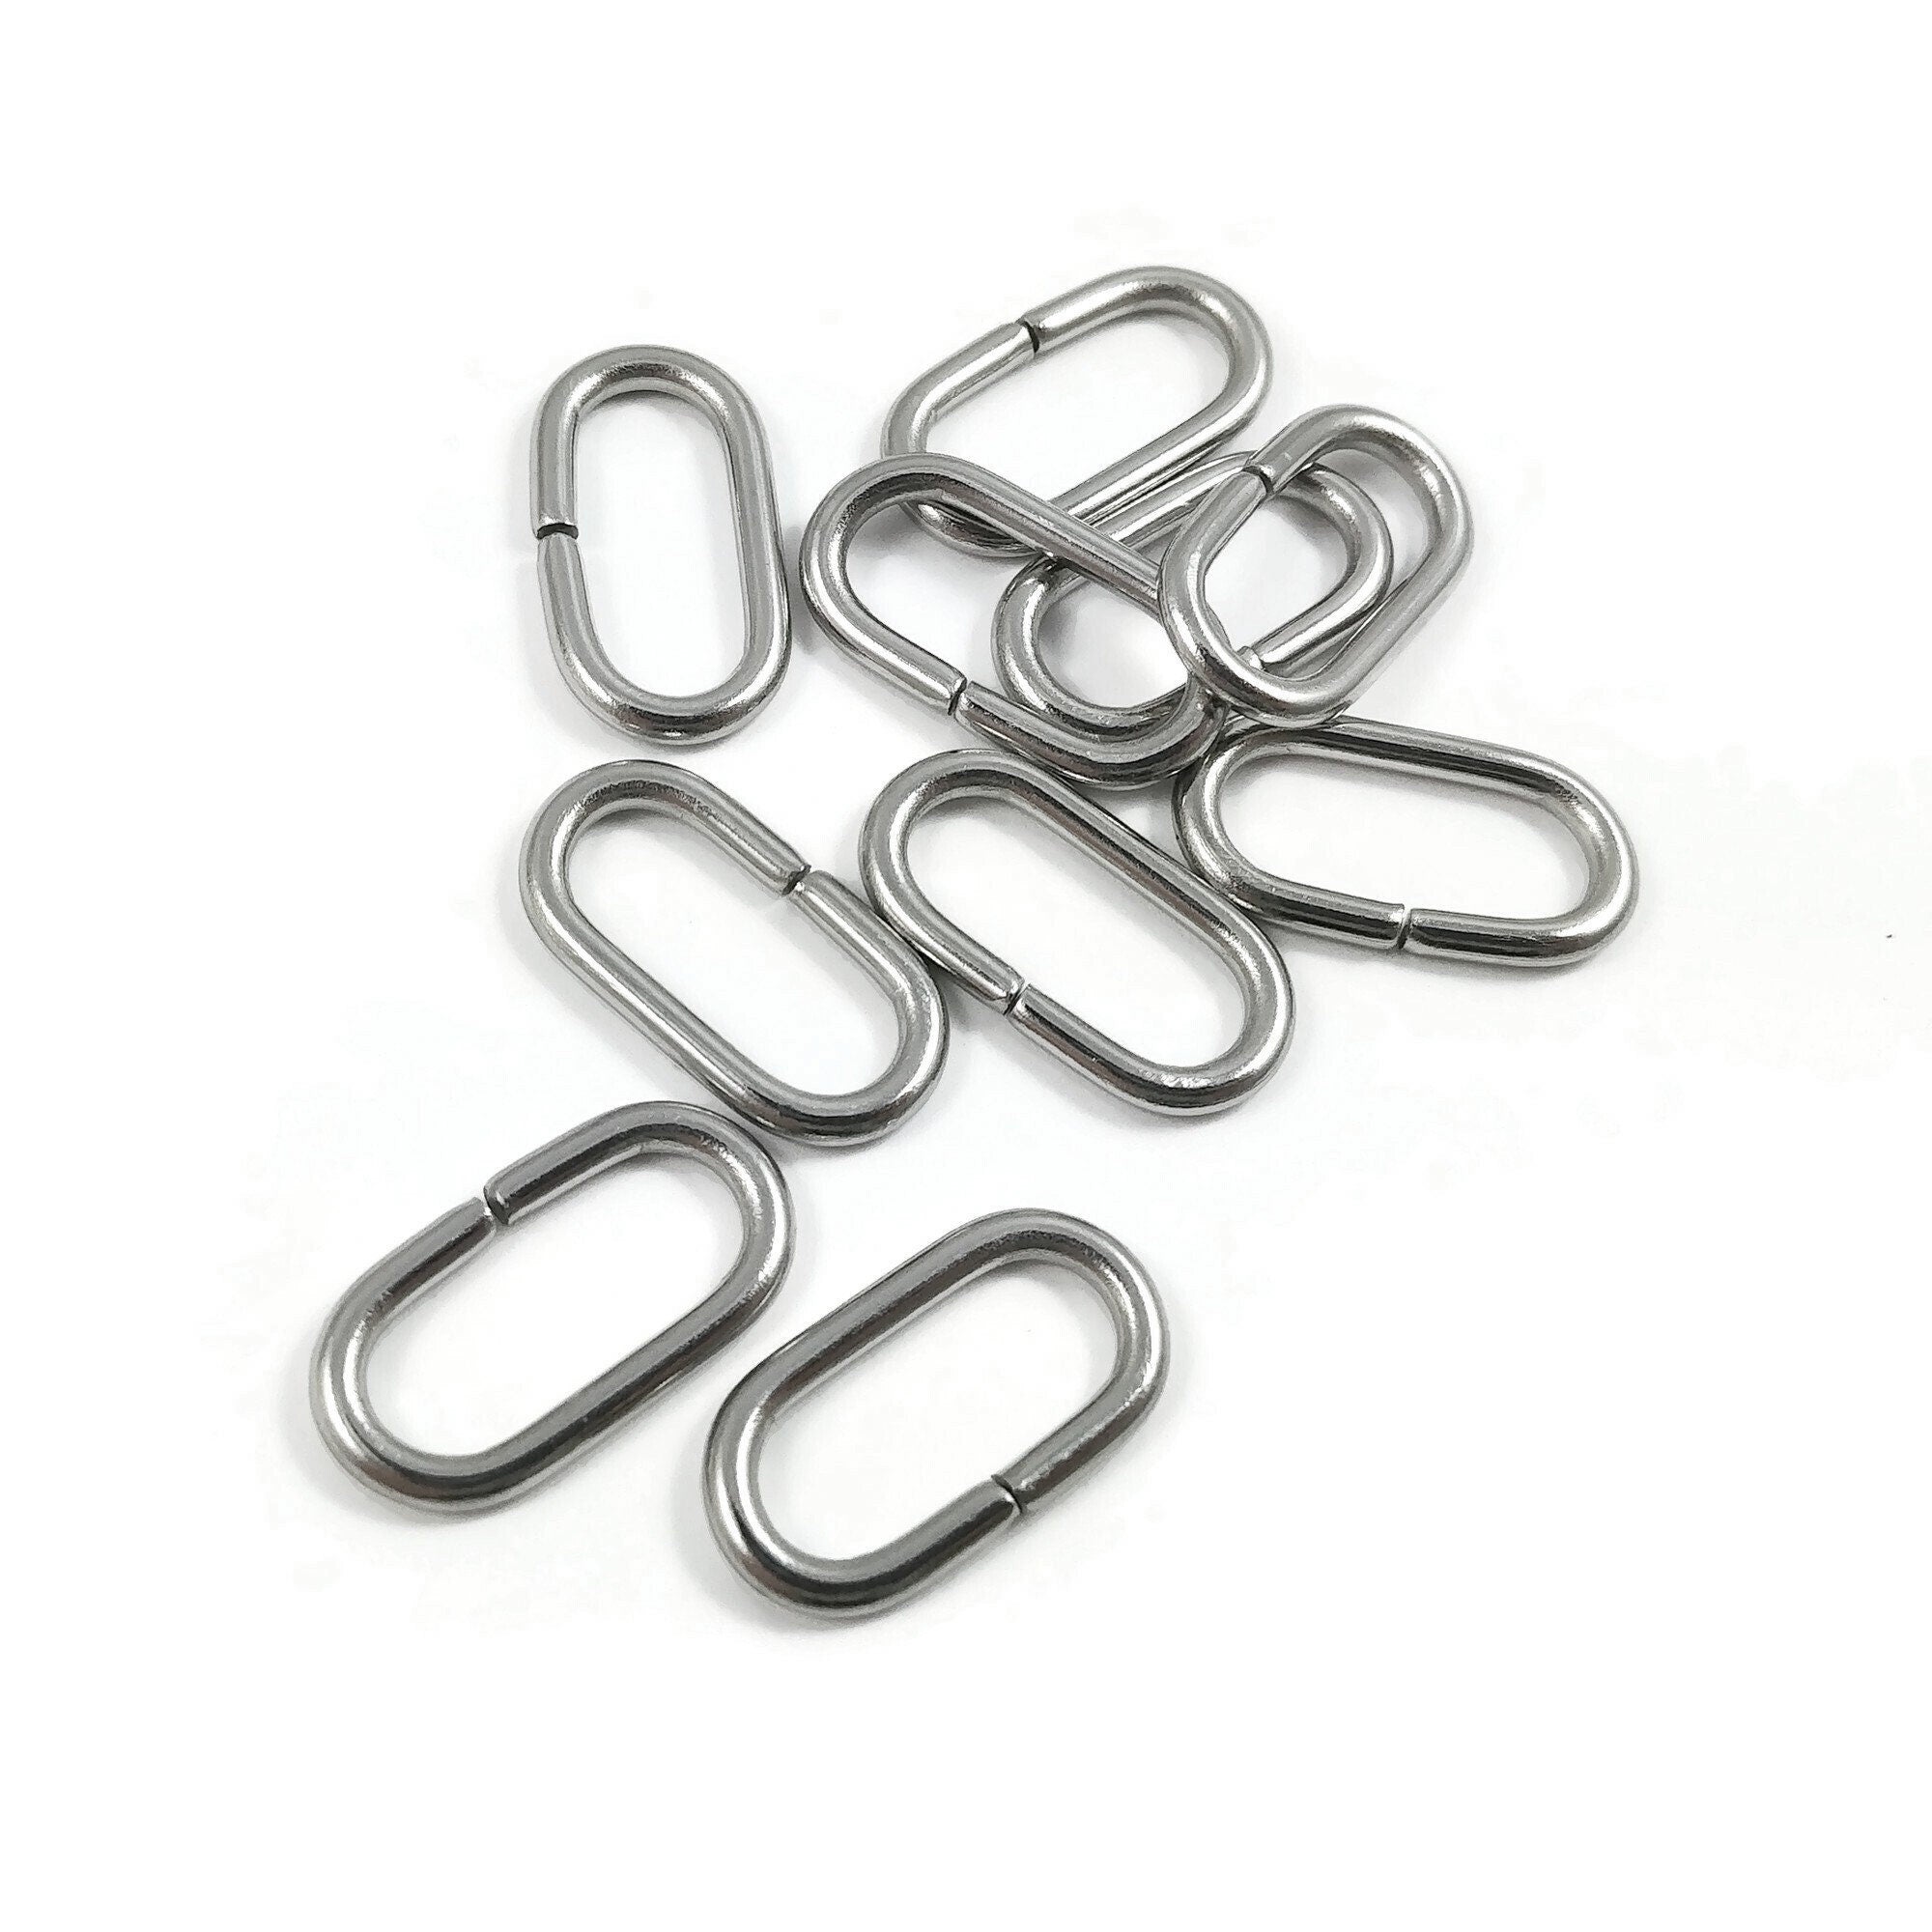 6mm Stainless Steel 18 gauge Open Jump Ring - Min Qty 20